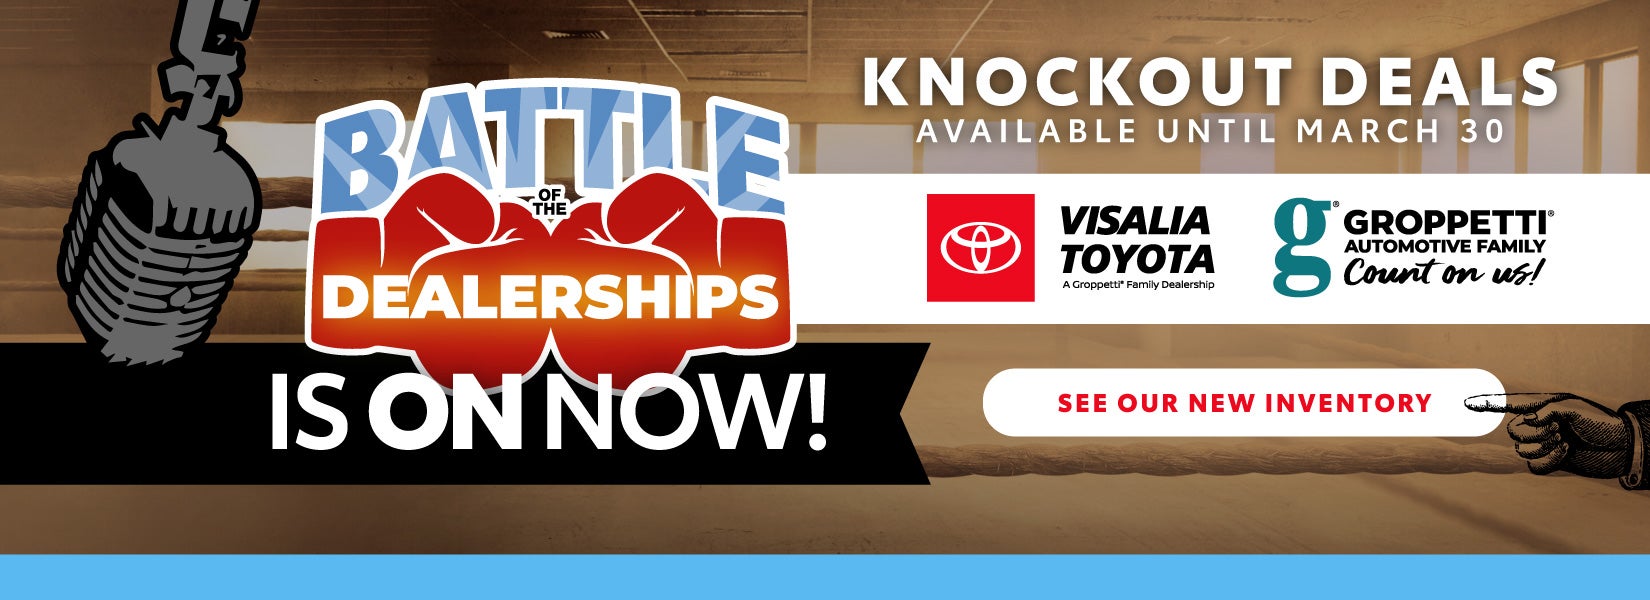 Battle of the Dealerships is ON NOW! Only at Visalia Toyota!